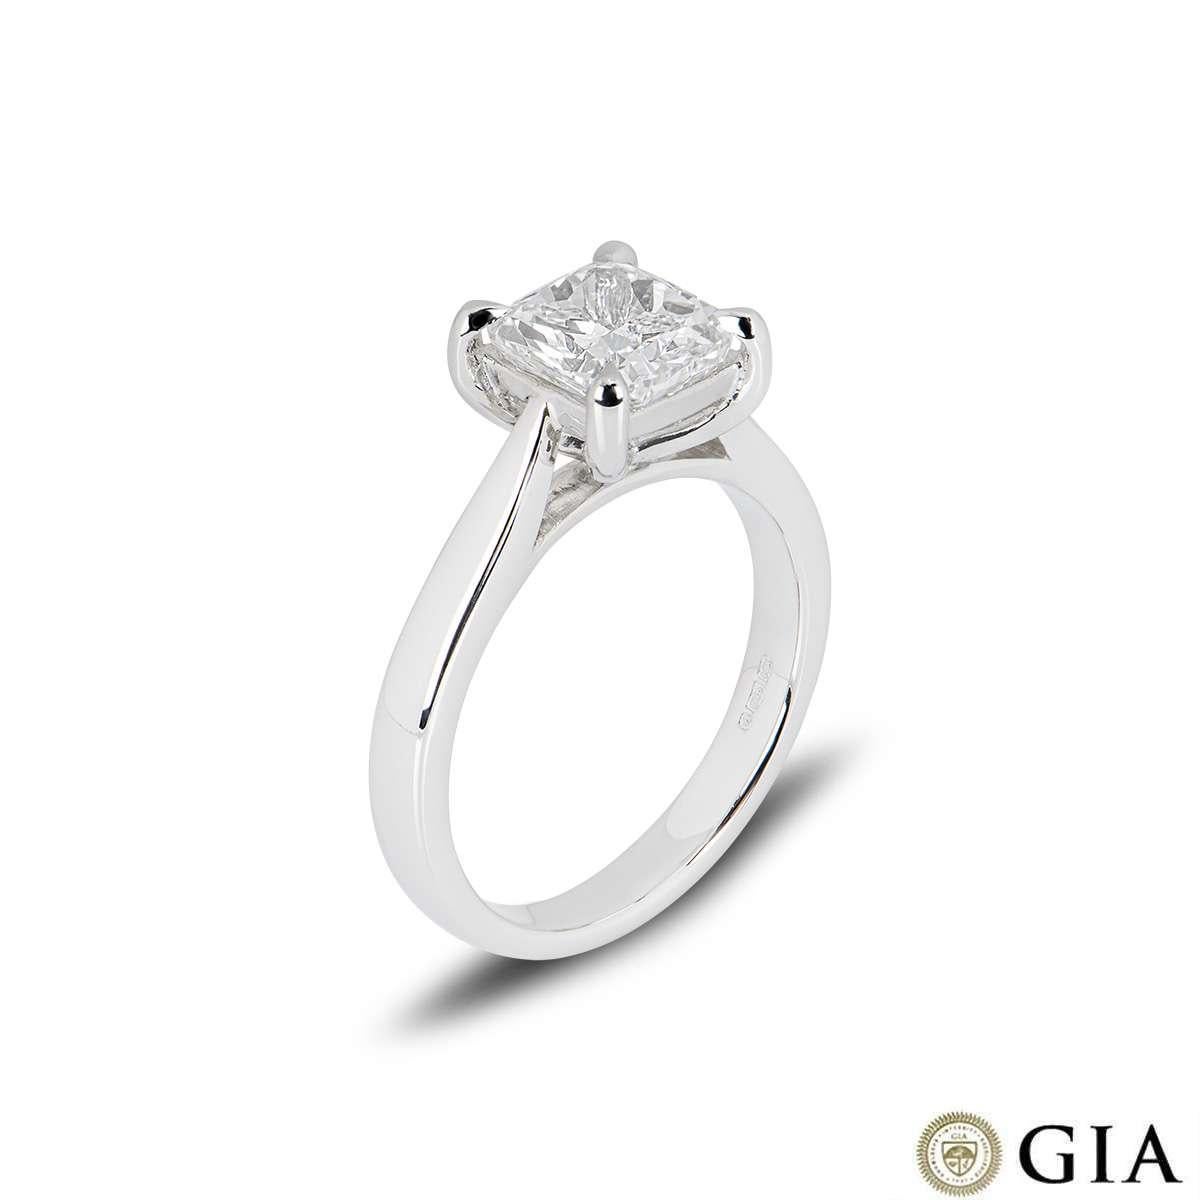 A stunning platinum cushion cut diamond engagement ring. The ring comprises of a cushion cut diamond in a four claw setting with a weight of 2.00ct, F colour and VS2 clarity. The ring is currently a size UK M - EU 52 - US 6 but can be adjusted for a